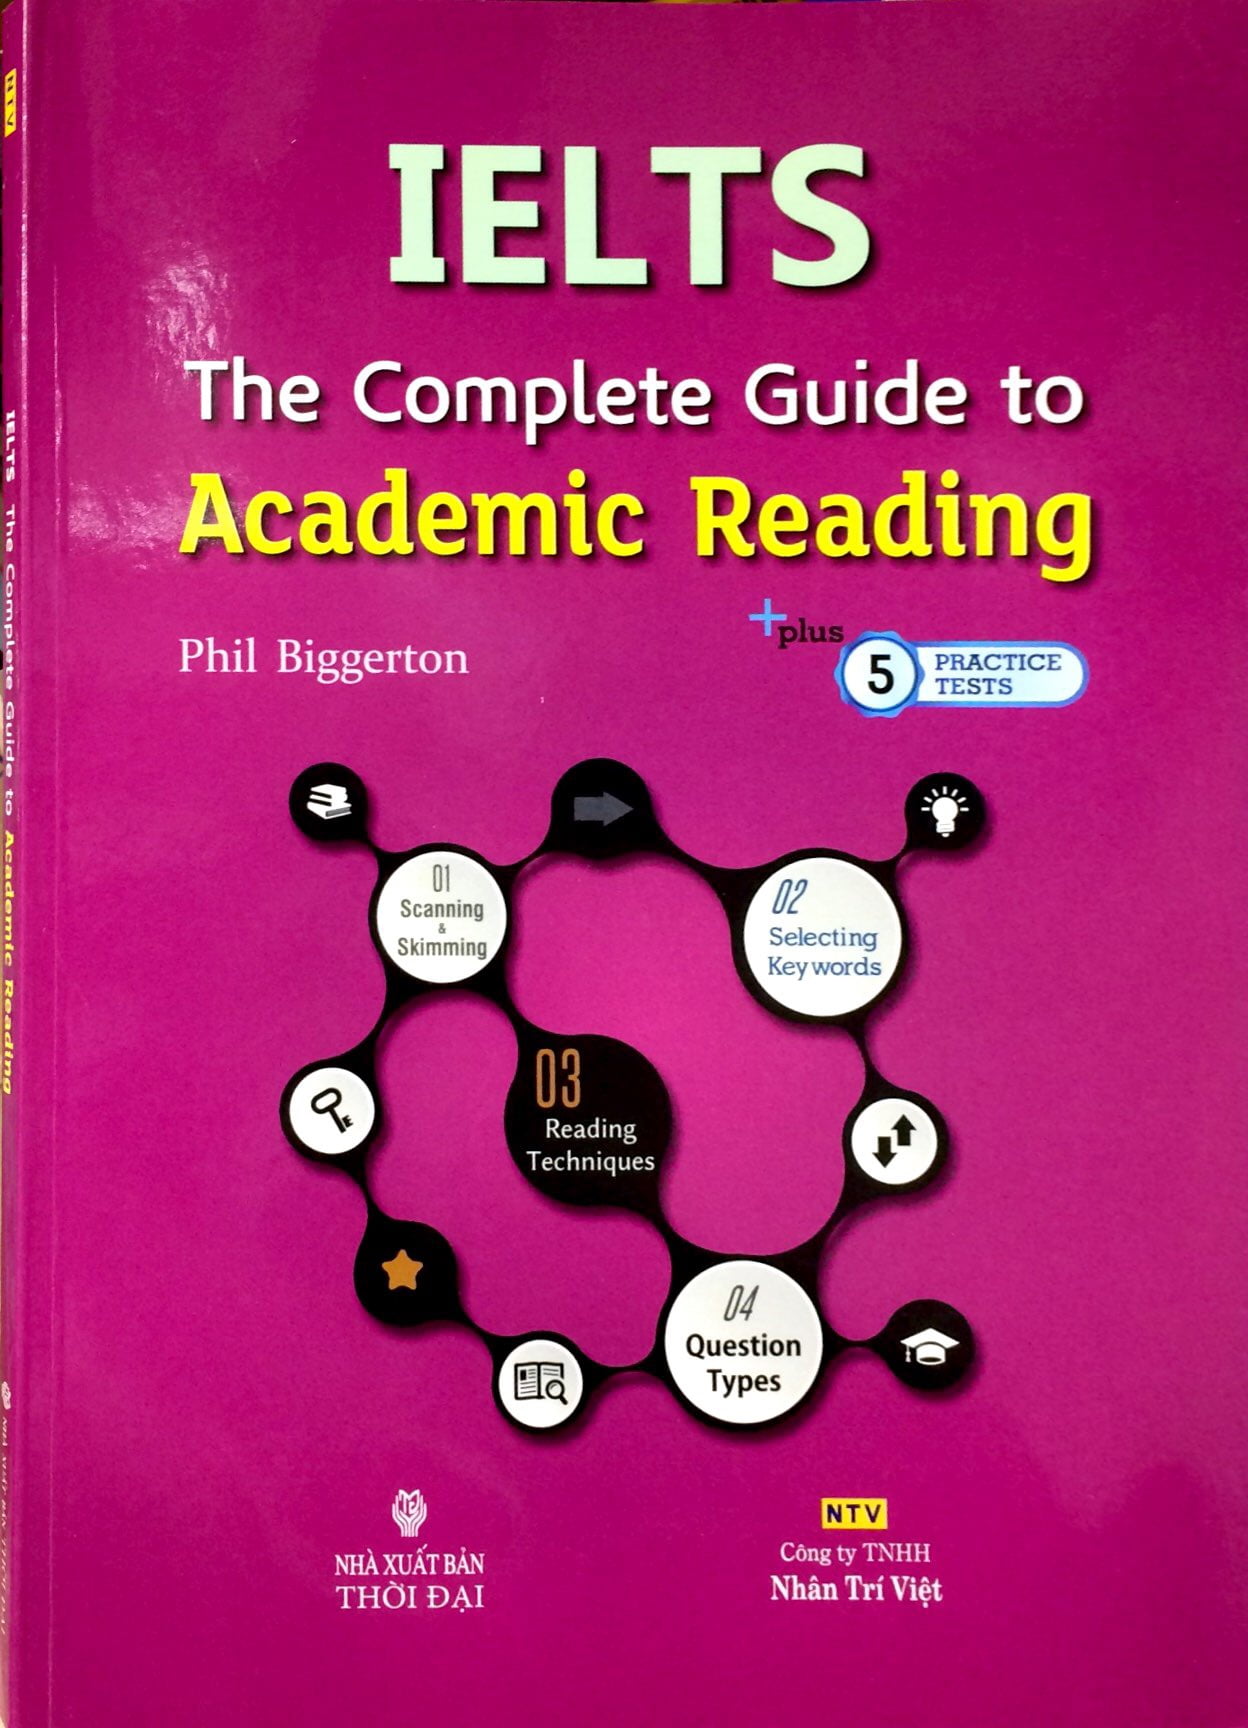 IELTS The Complete Guide To Academic Reading PDF